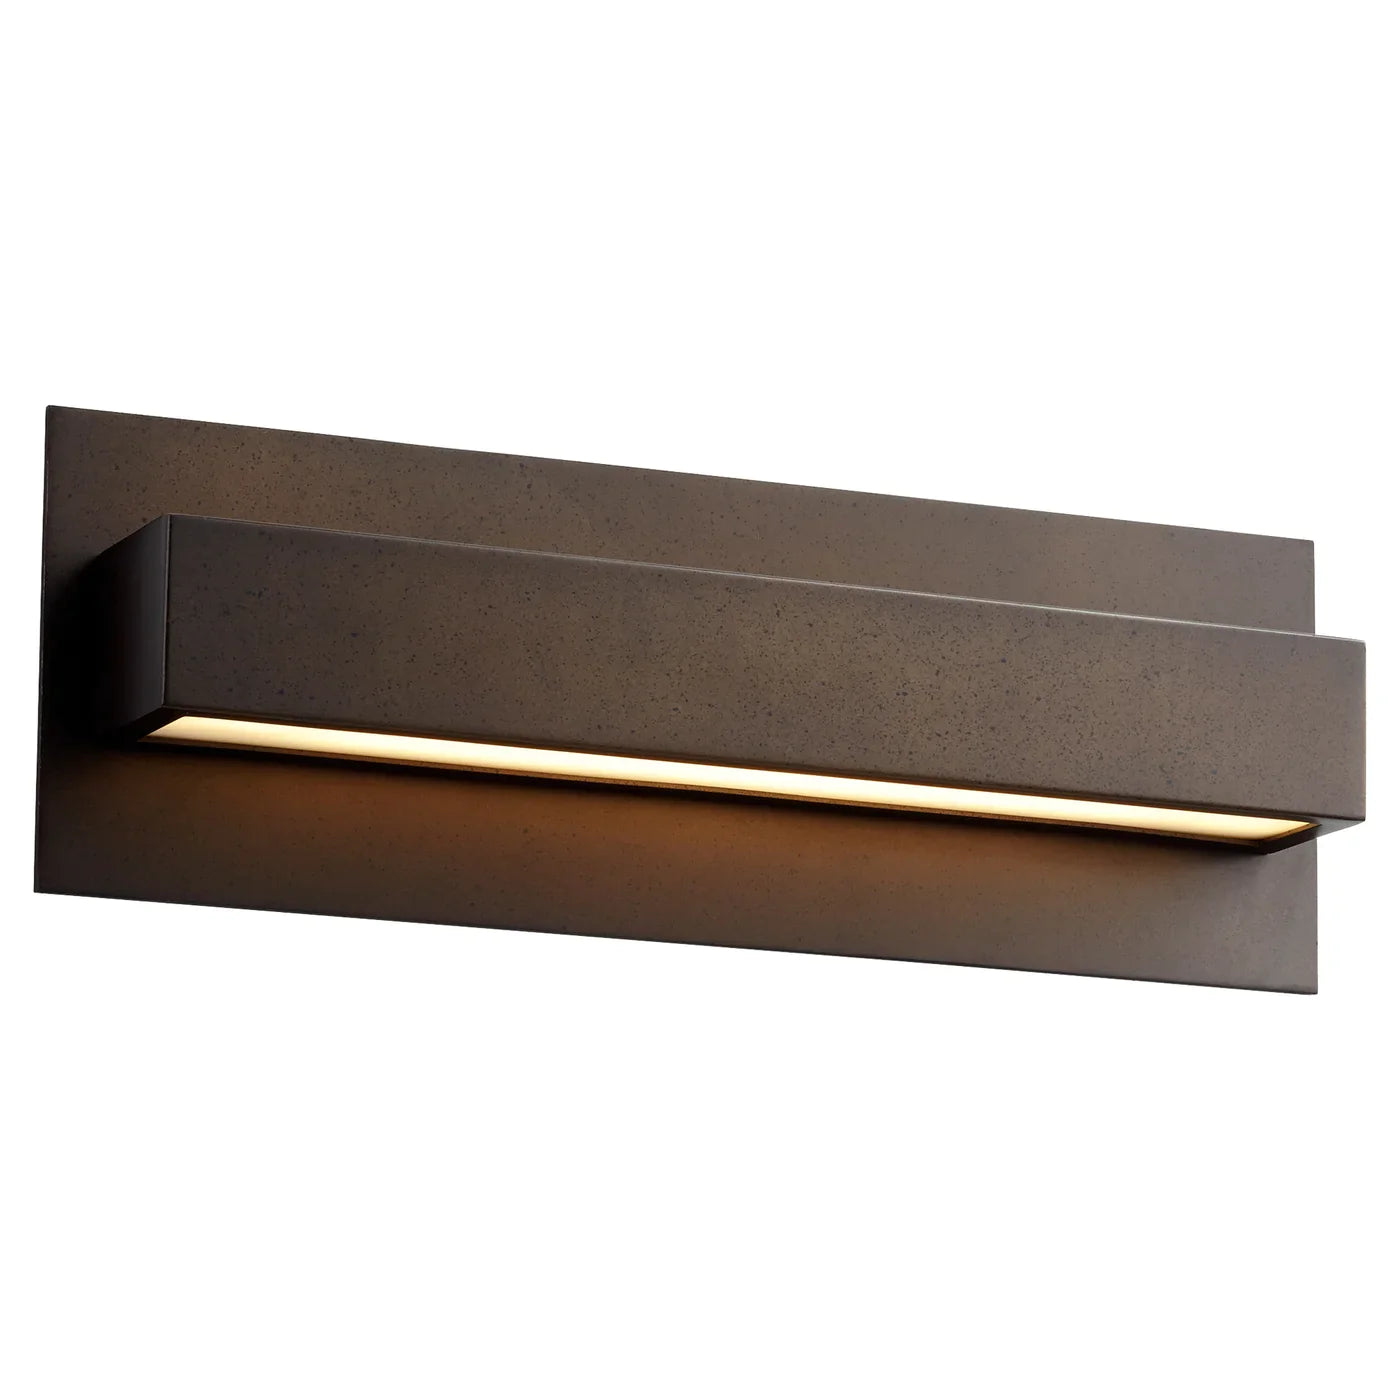 Oxygen Alcor 3-532-22 LED Wall Light Fixture 13 Inch - Oiled Bronze